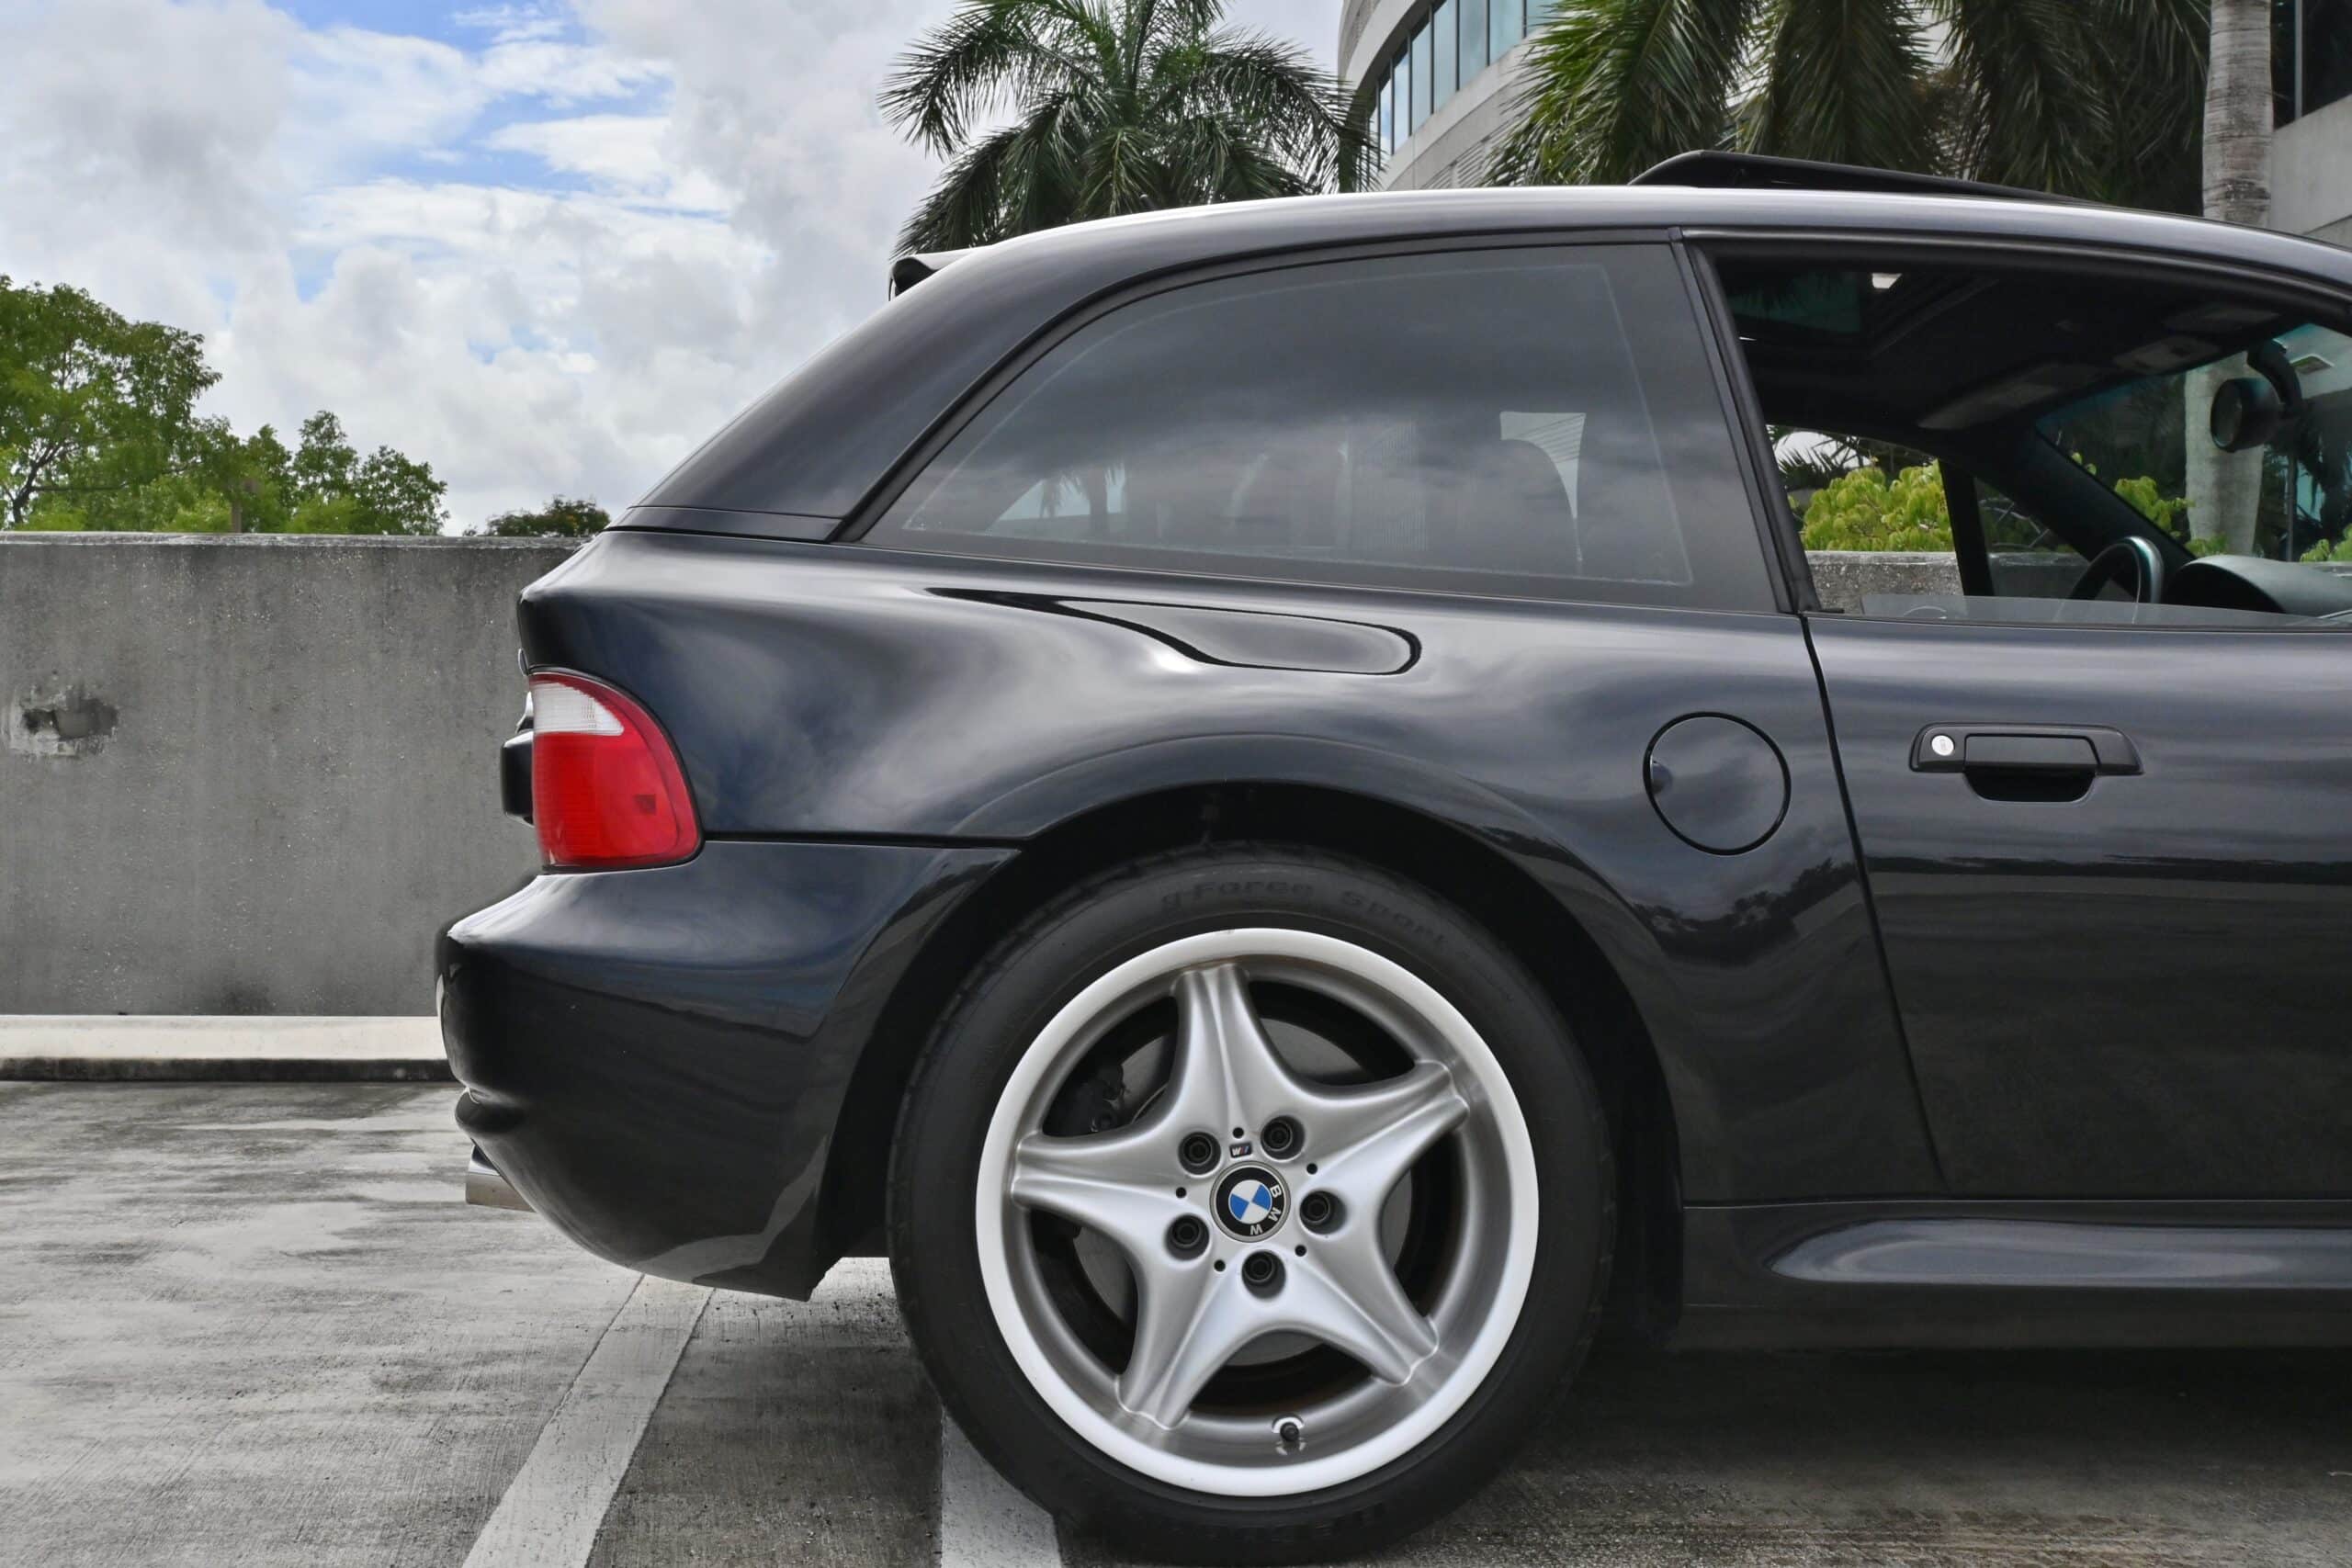 2000 BMW Z3 M Coupe 1 of 41 in this Color Combination – Unmodified – Well Maintained – Florida Car